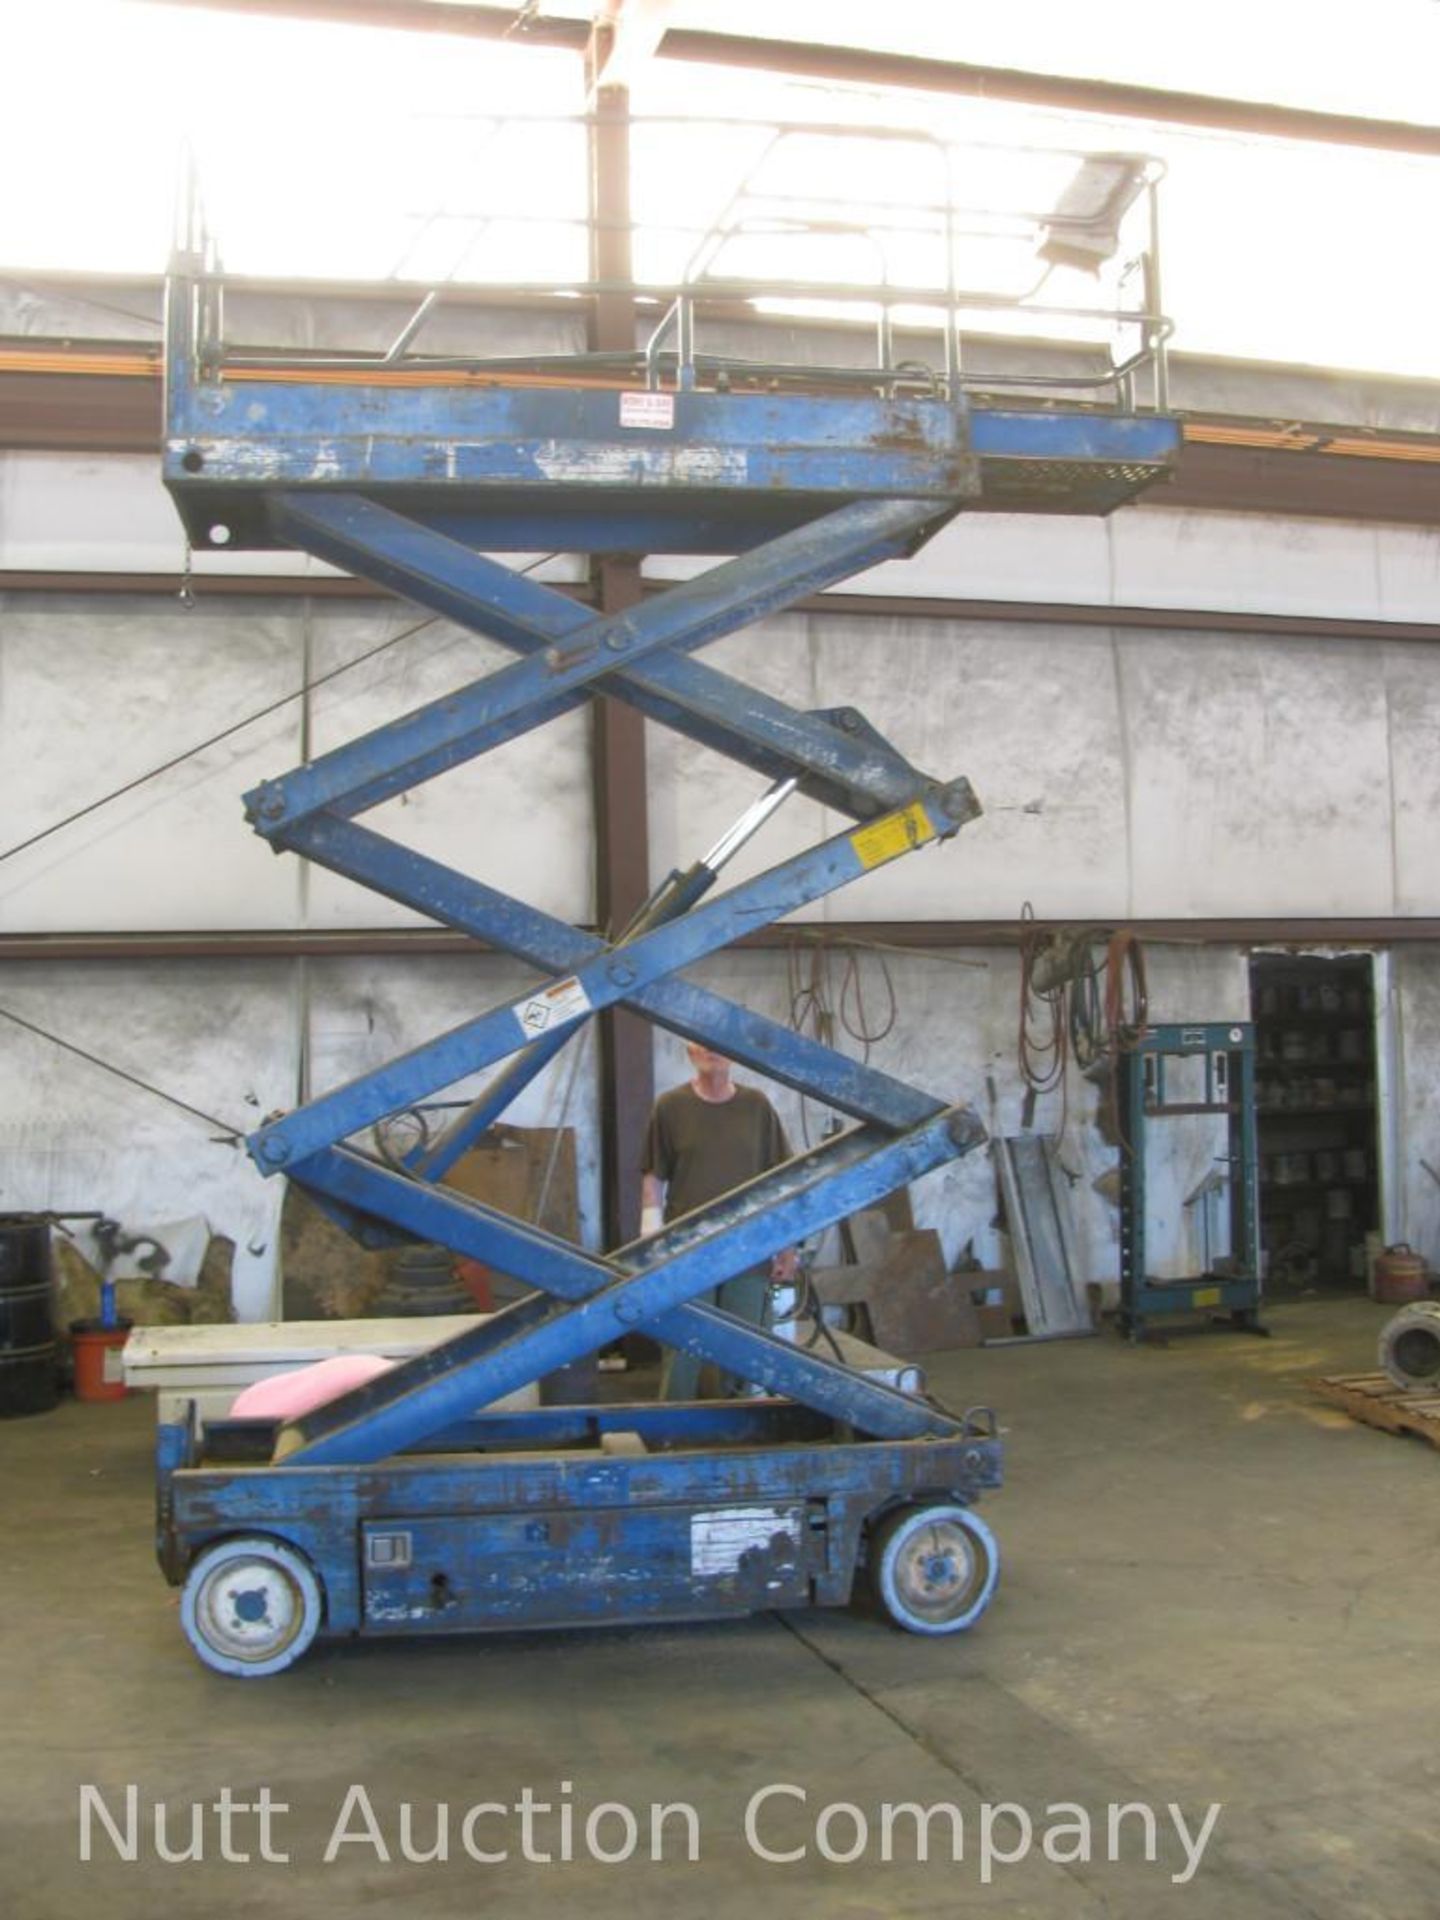 Upright 20N Scissor Lift Model: 66000-000, Serial: 2213, Capacity: 20 Ft, Weight: 750 Lbs - Image 3 of 8